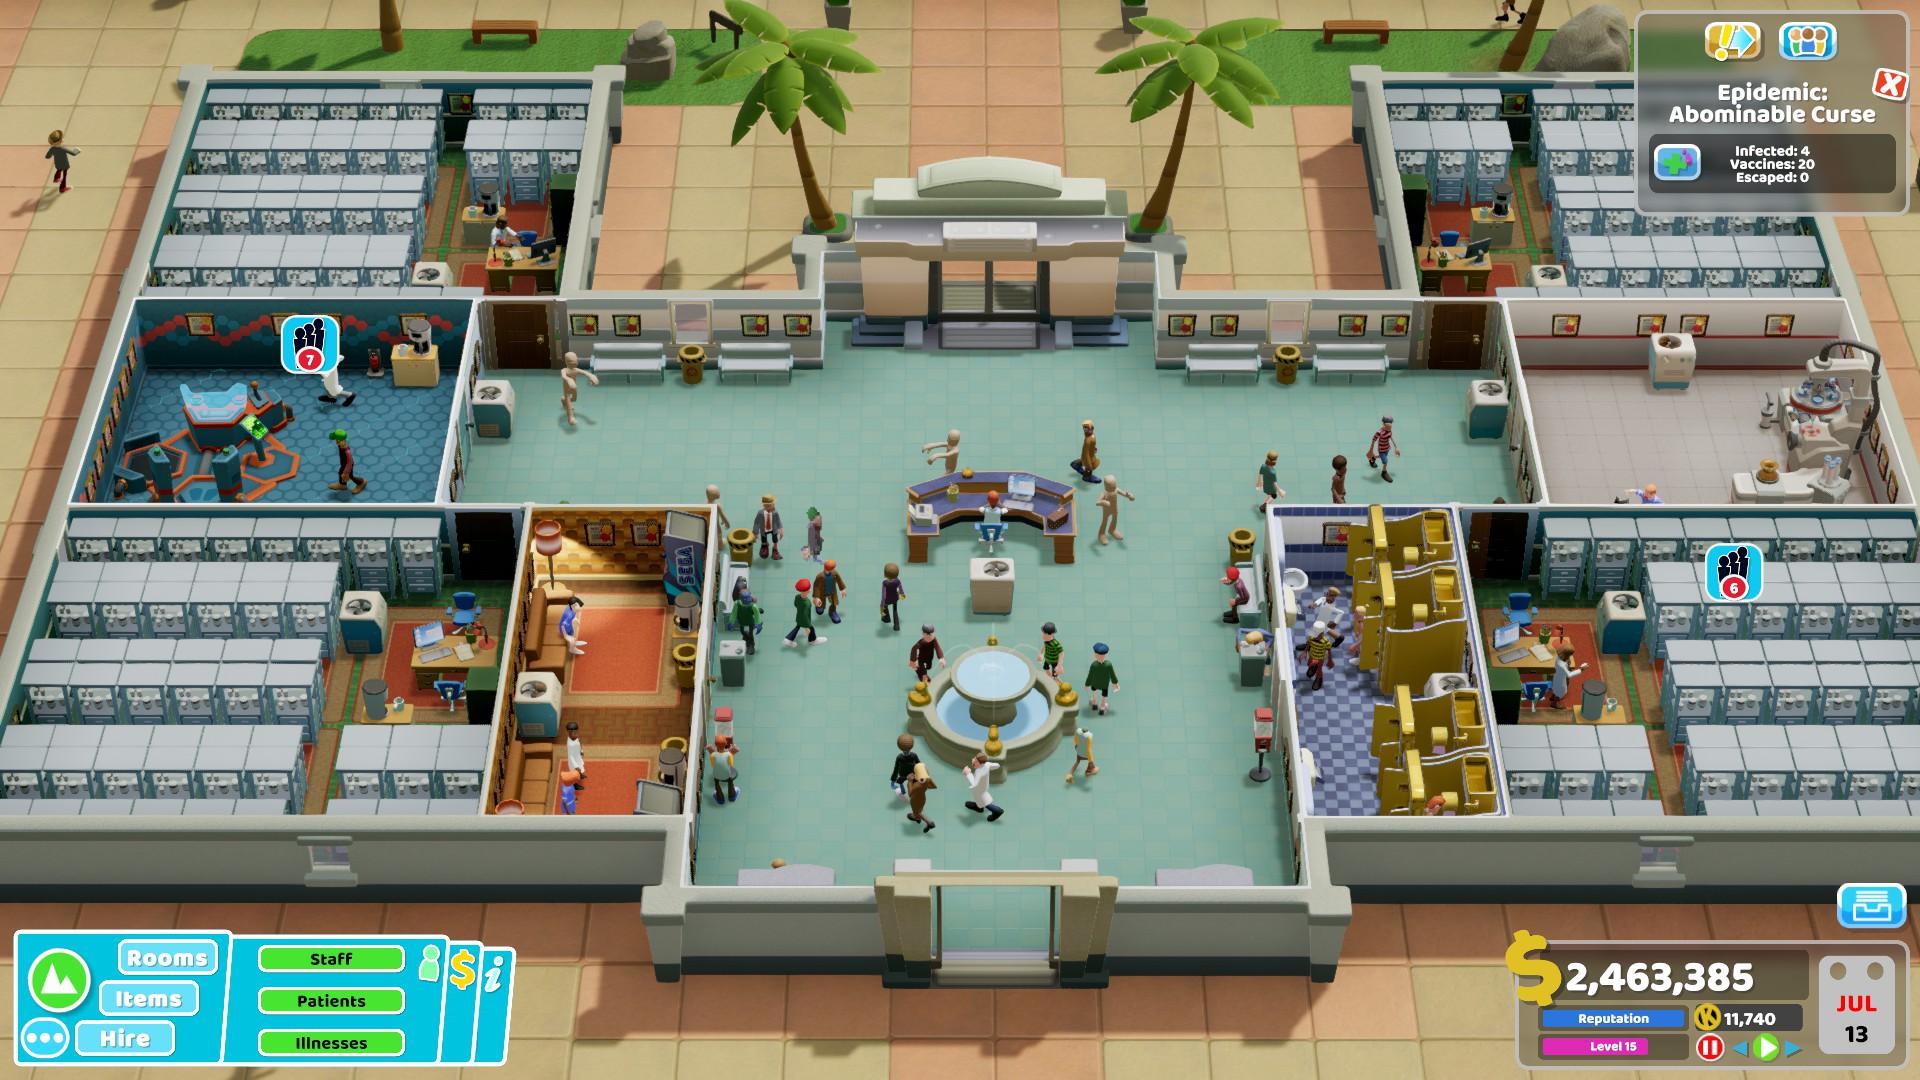 one point hospital download free